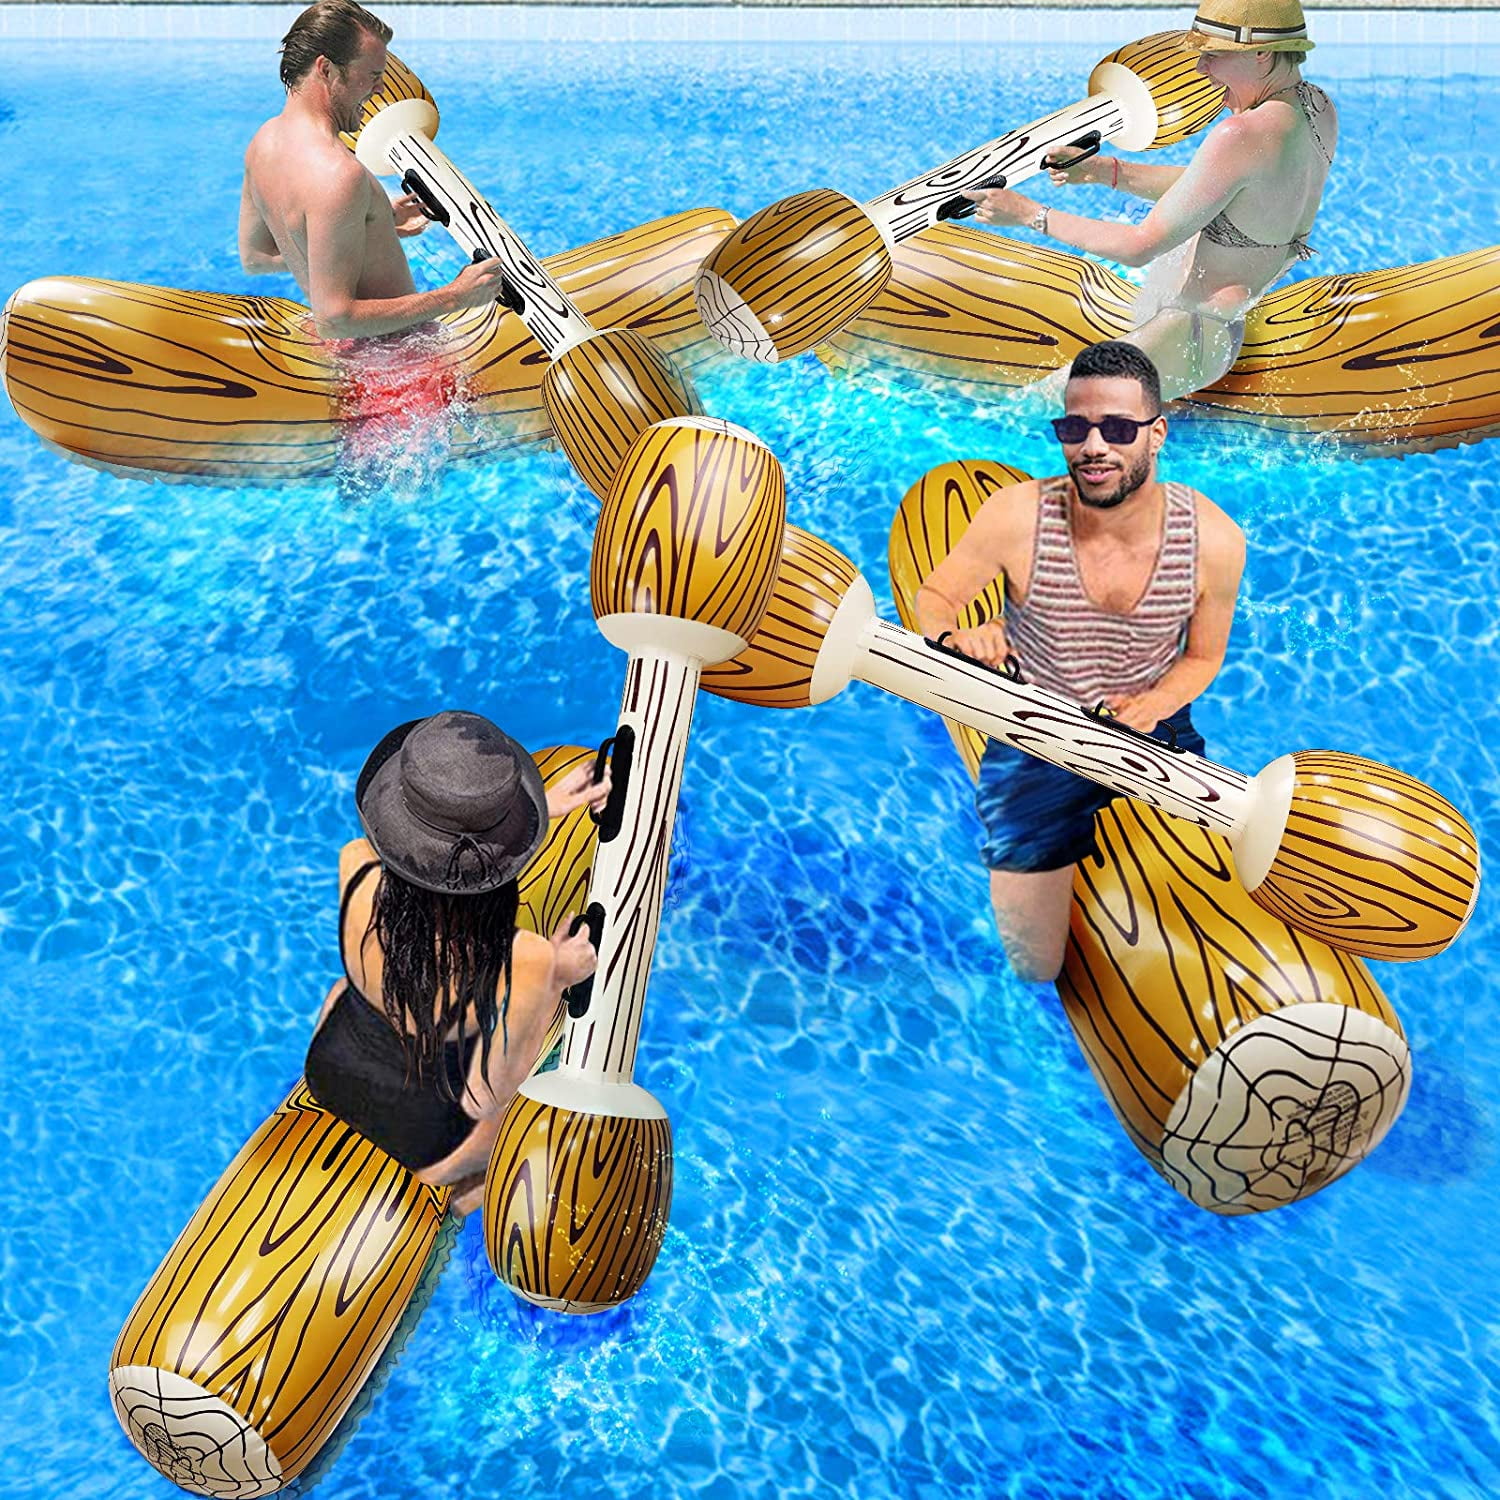 Details about   Swimming Pool Game Set Inflatable Log Shaped Float Raft Water Toy Kids Adult Fun 